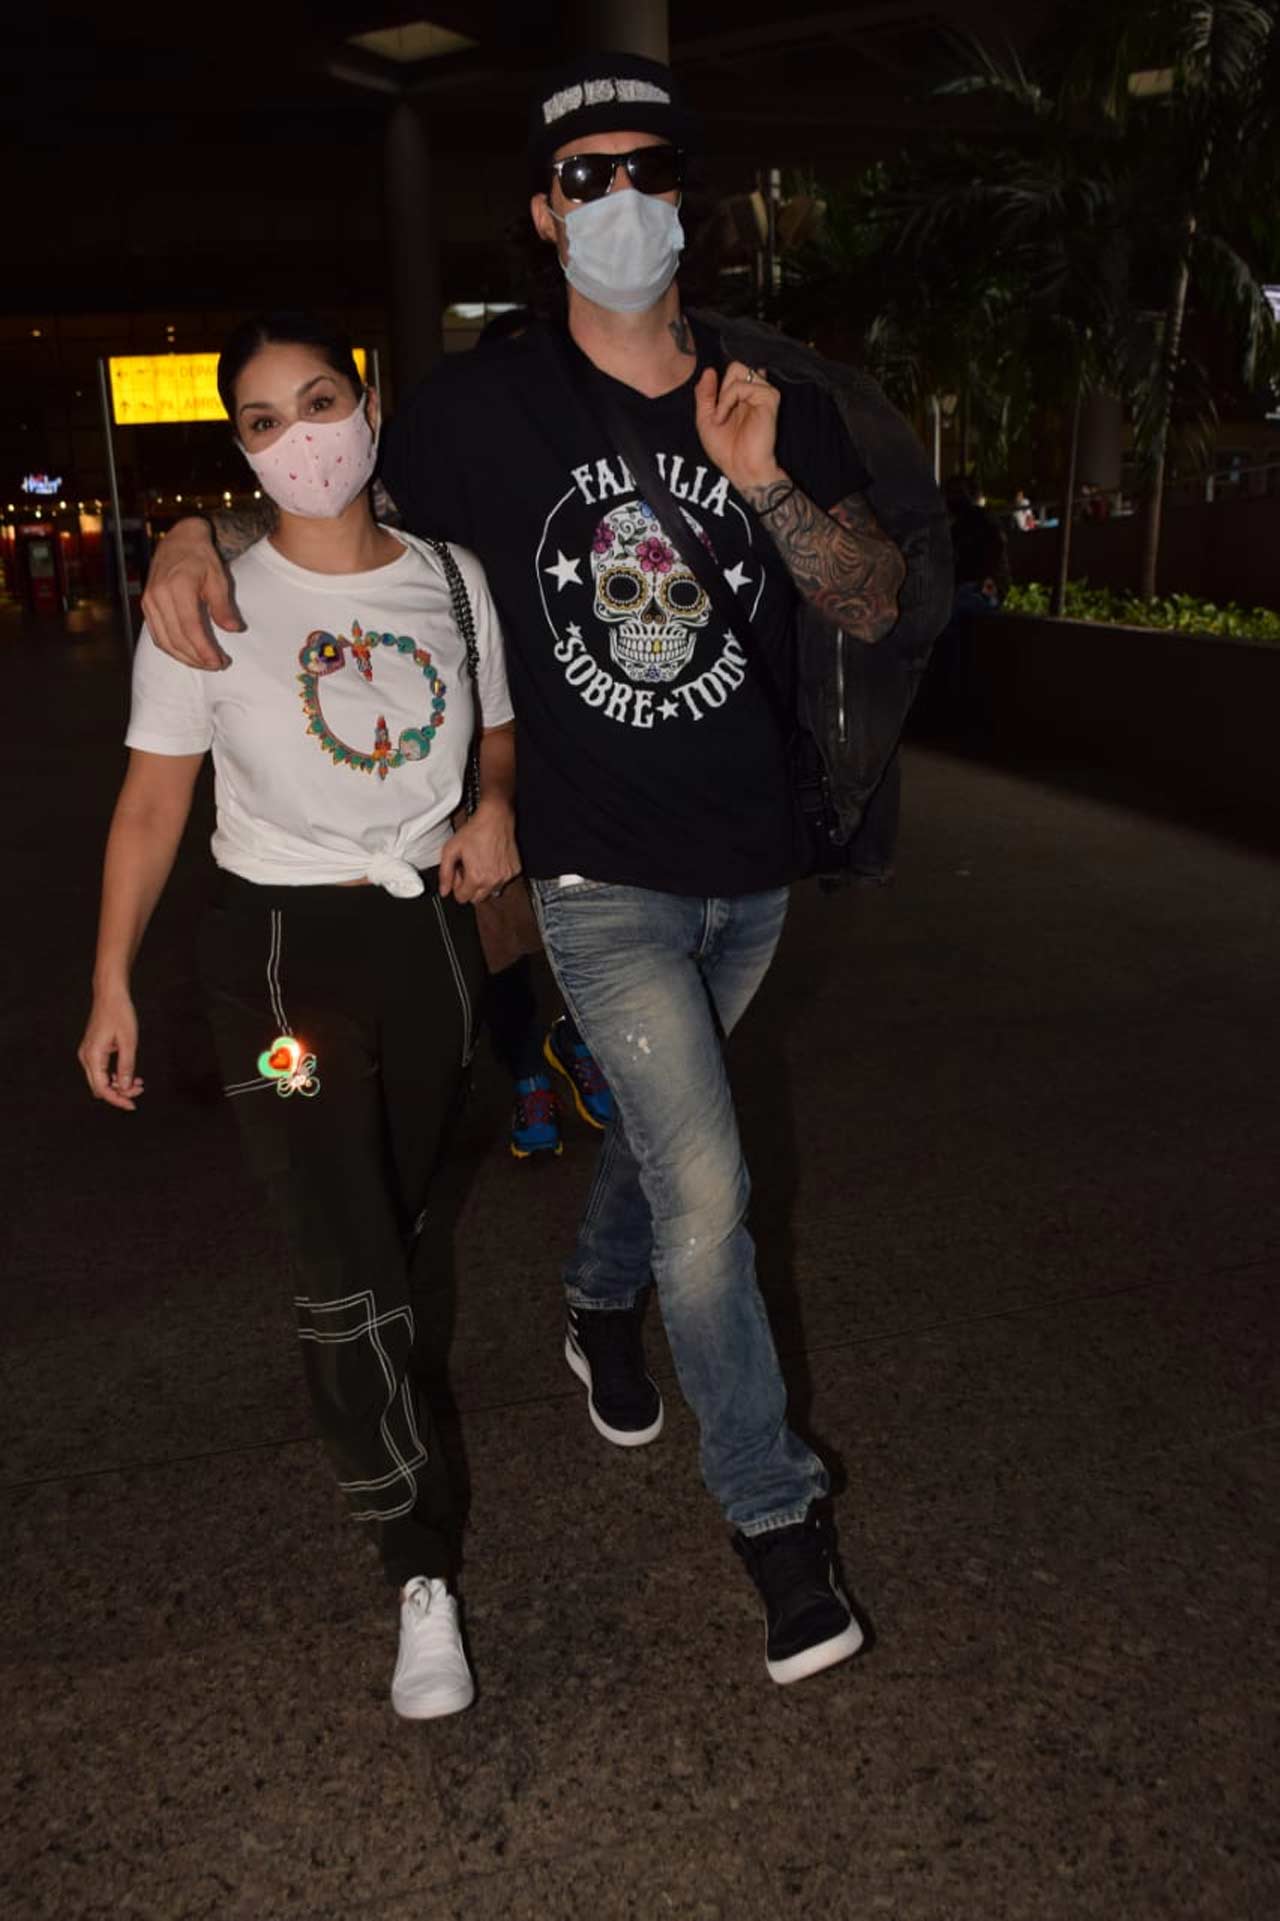 Sunny Leone and Daniel Weber, who were in Delhi for an event, were all smiles when snapped at the Mumbai airport. Sunny was seen wearing a white tee, paired with denim pants whereas Daniel kept it cool with a black graphic t-shirt and denim.